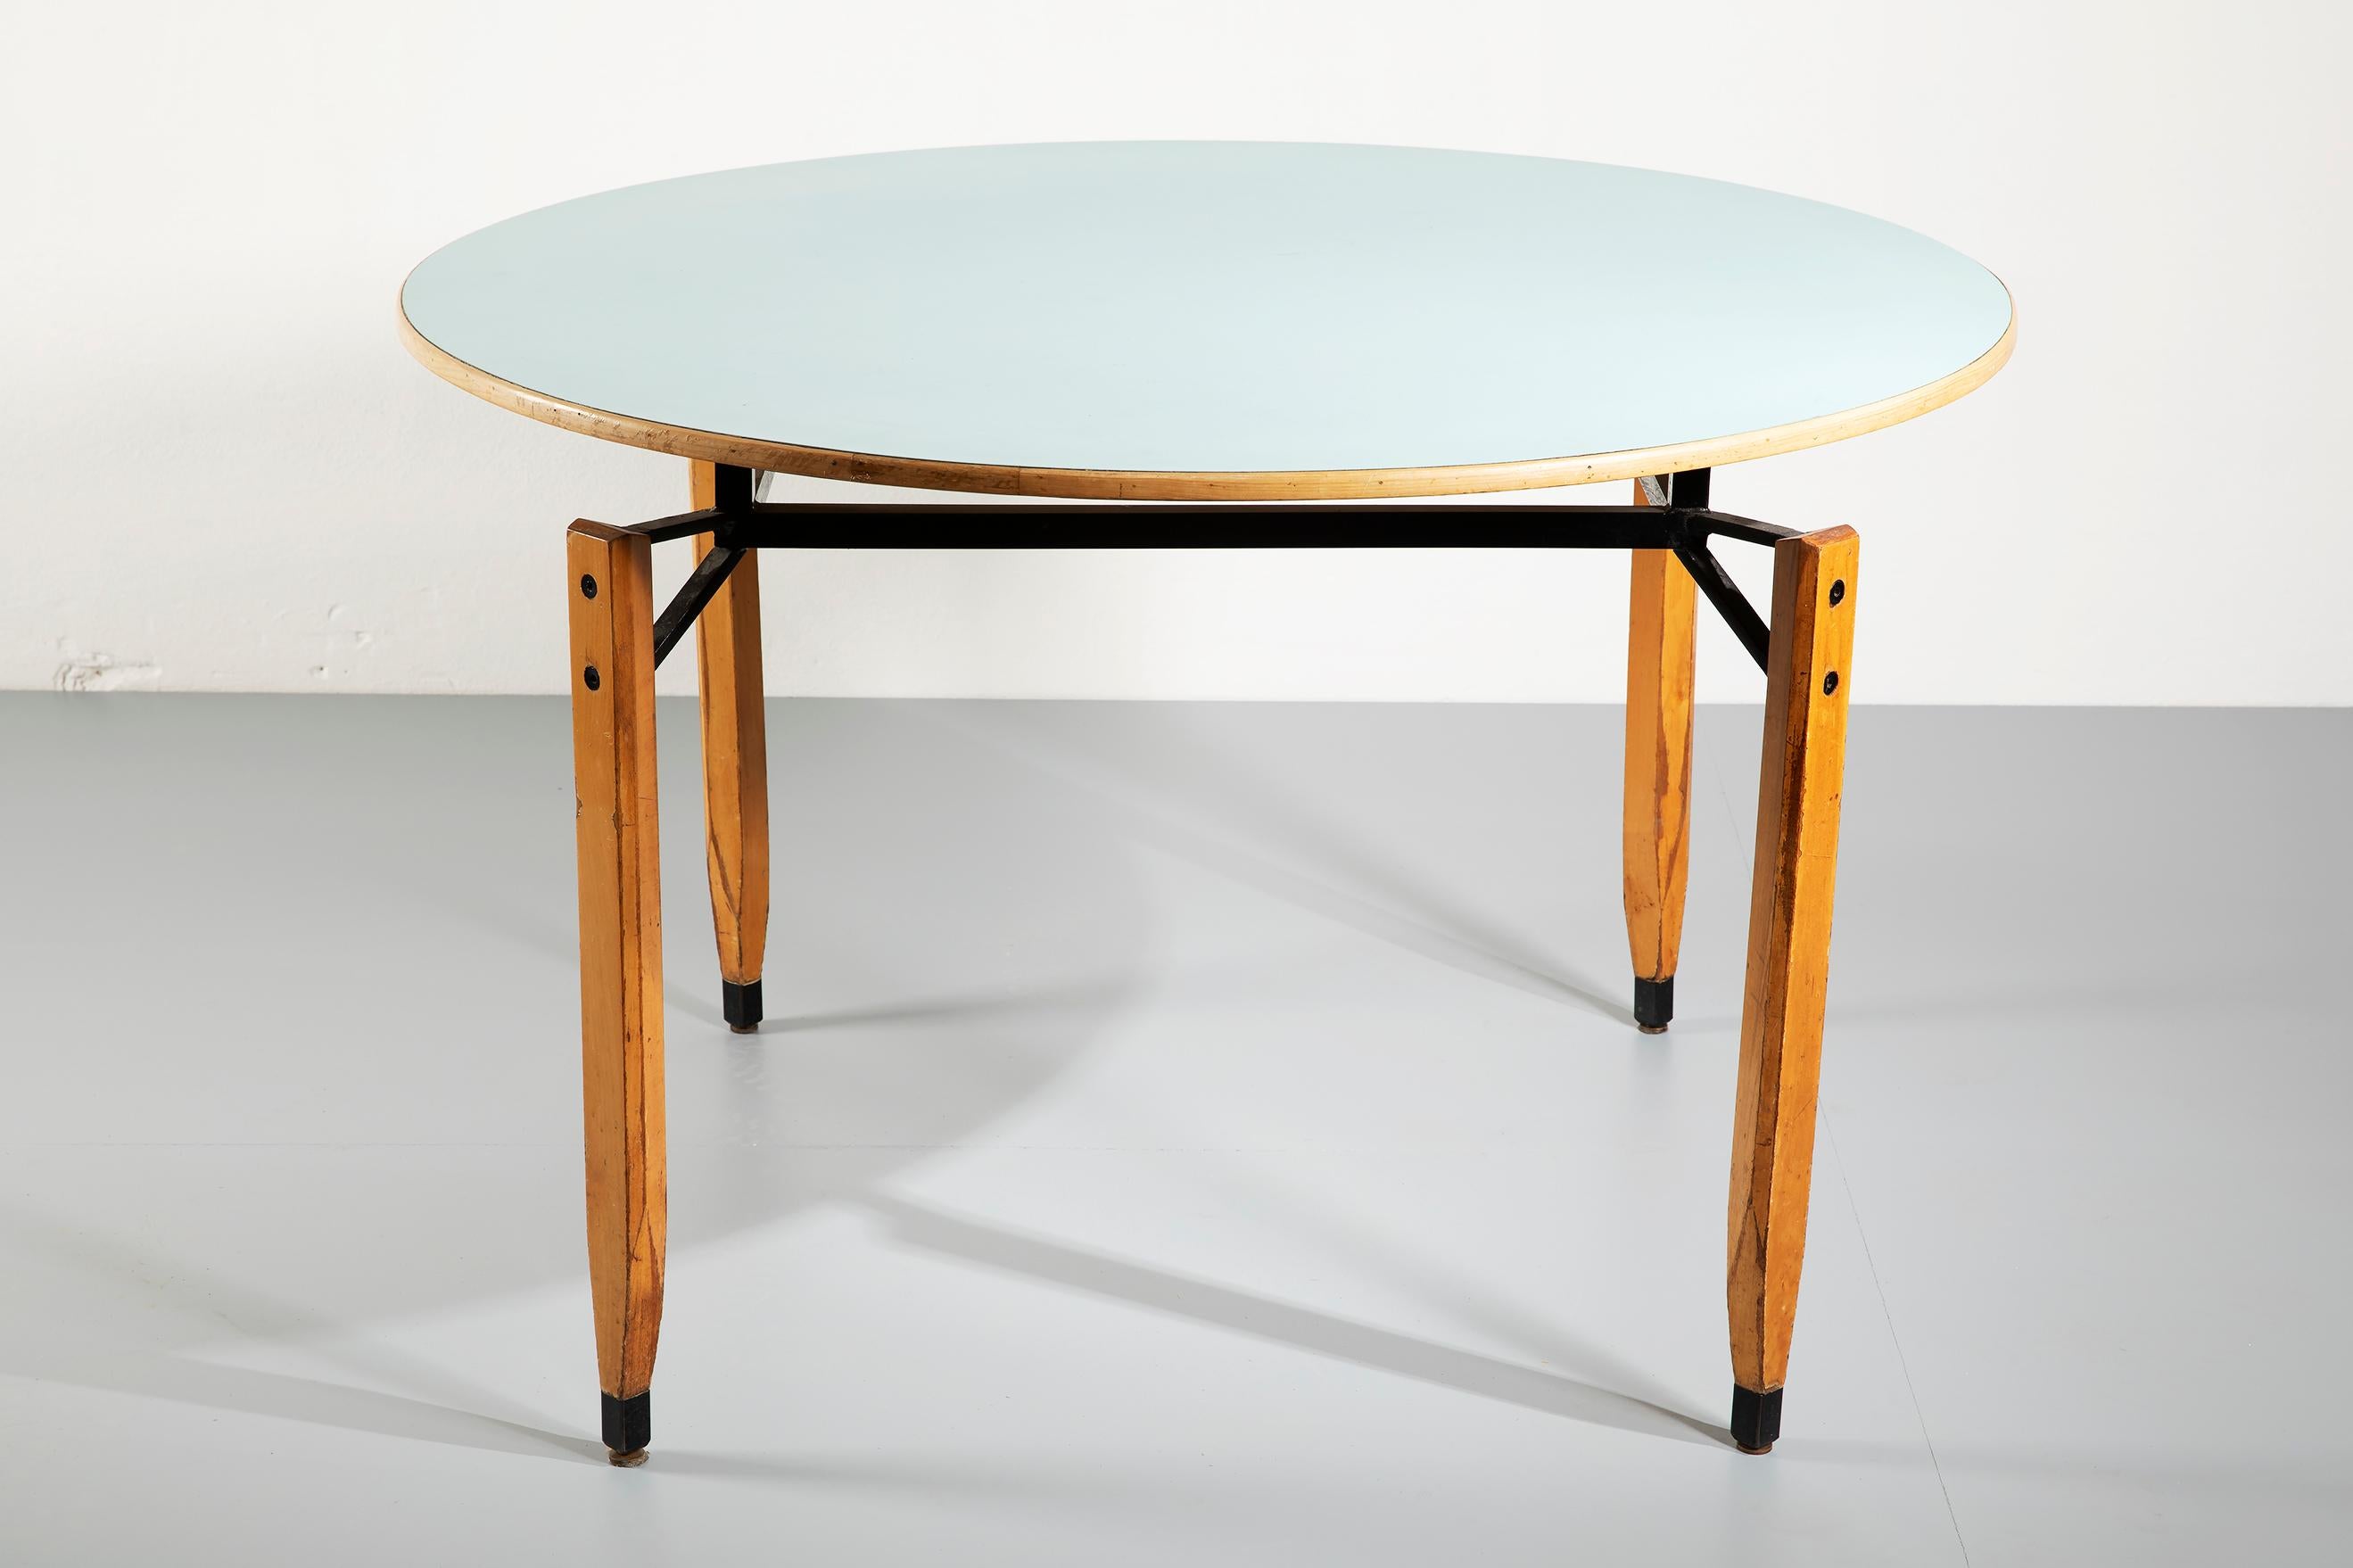 Roberto Aloi Oakwood and Light Blue Plastic Italian Round Dining Table, 1950s For Sale 1